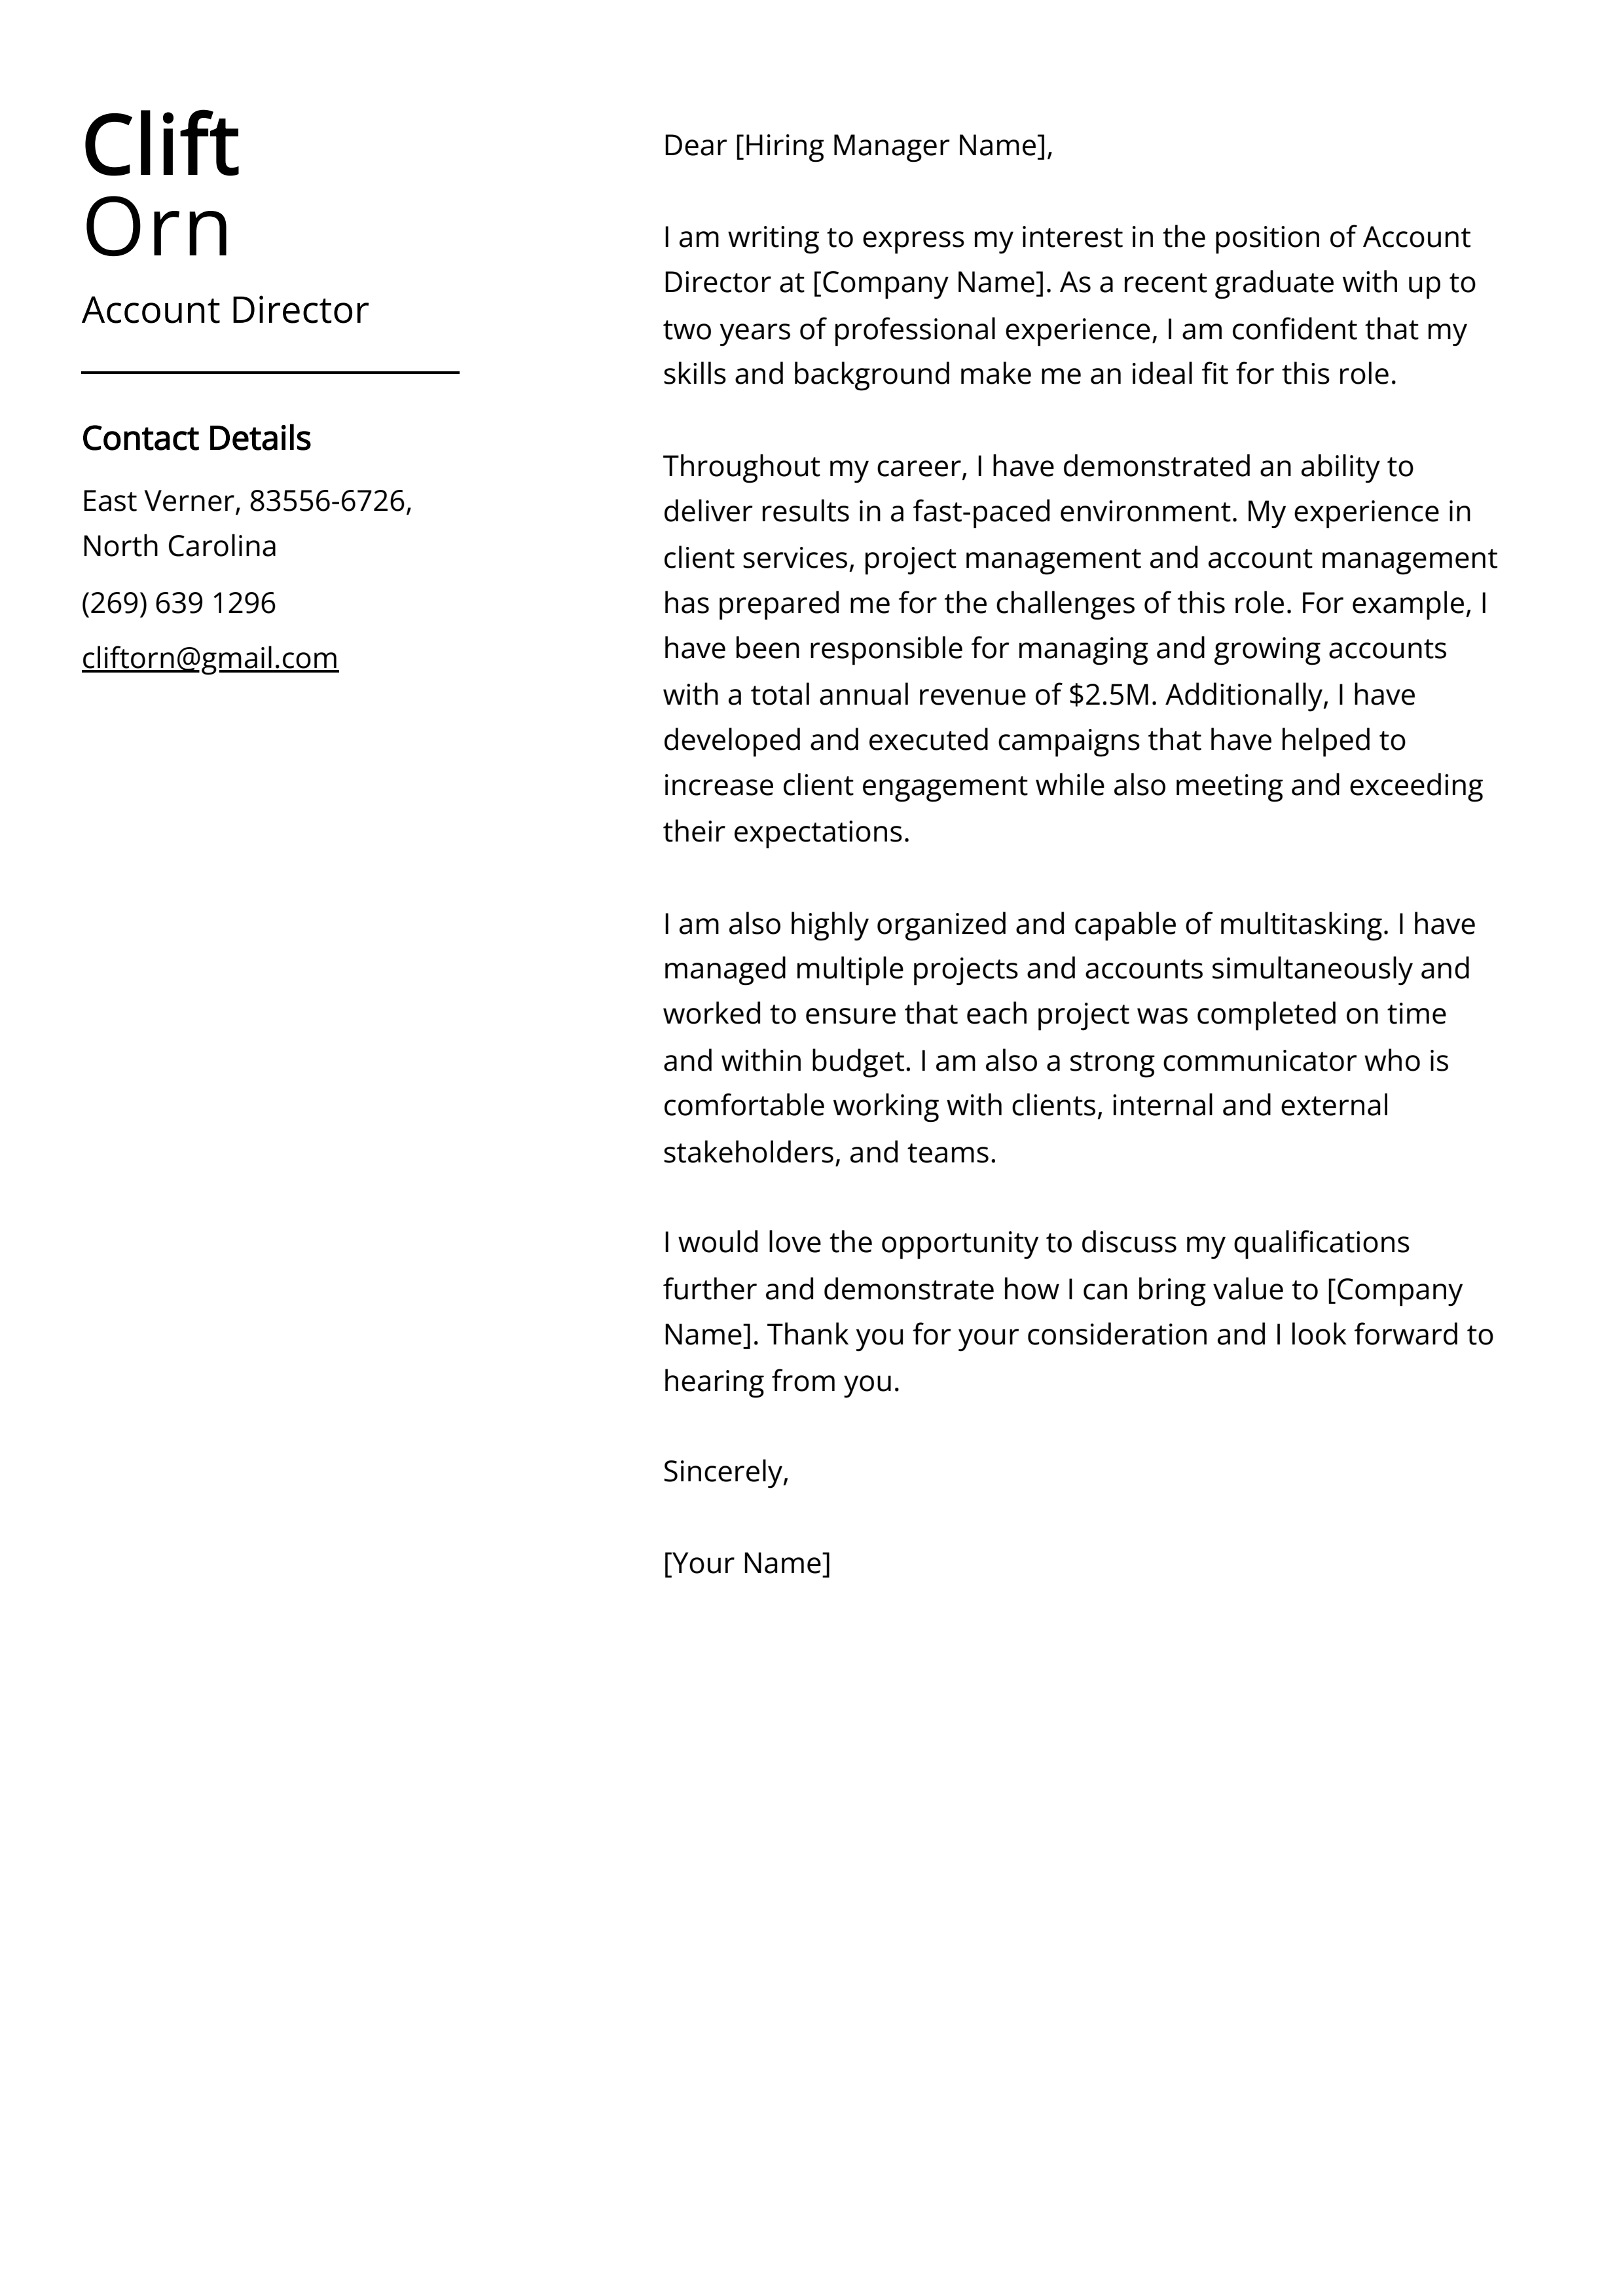 Account Director Cover Letter Example